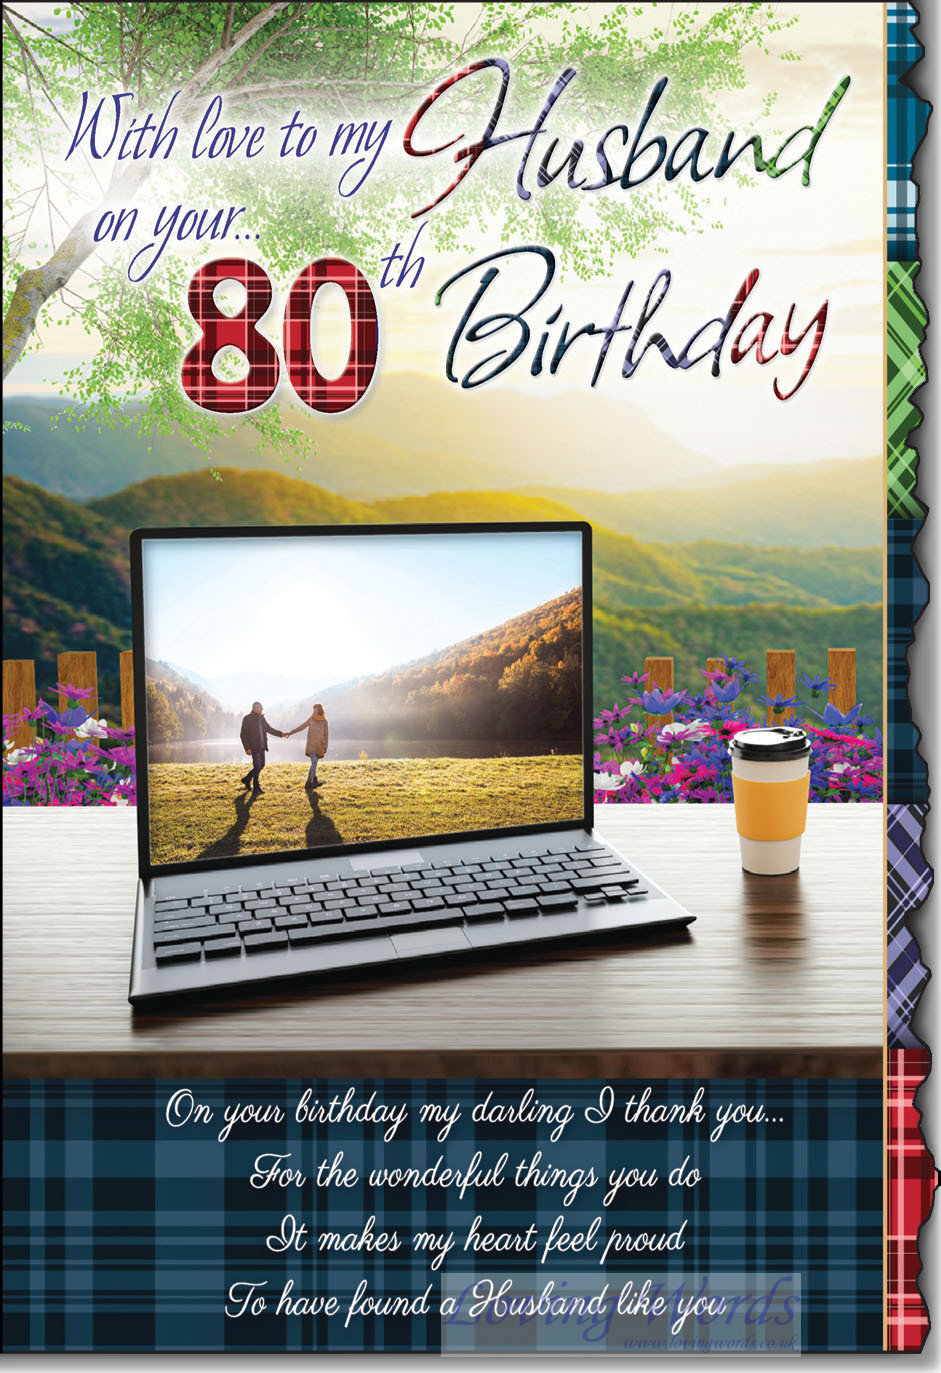 husband-80th-birthday-greeting-cards-by-loving-words